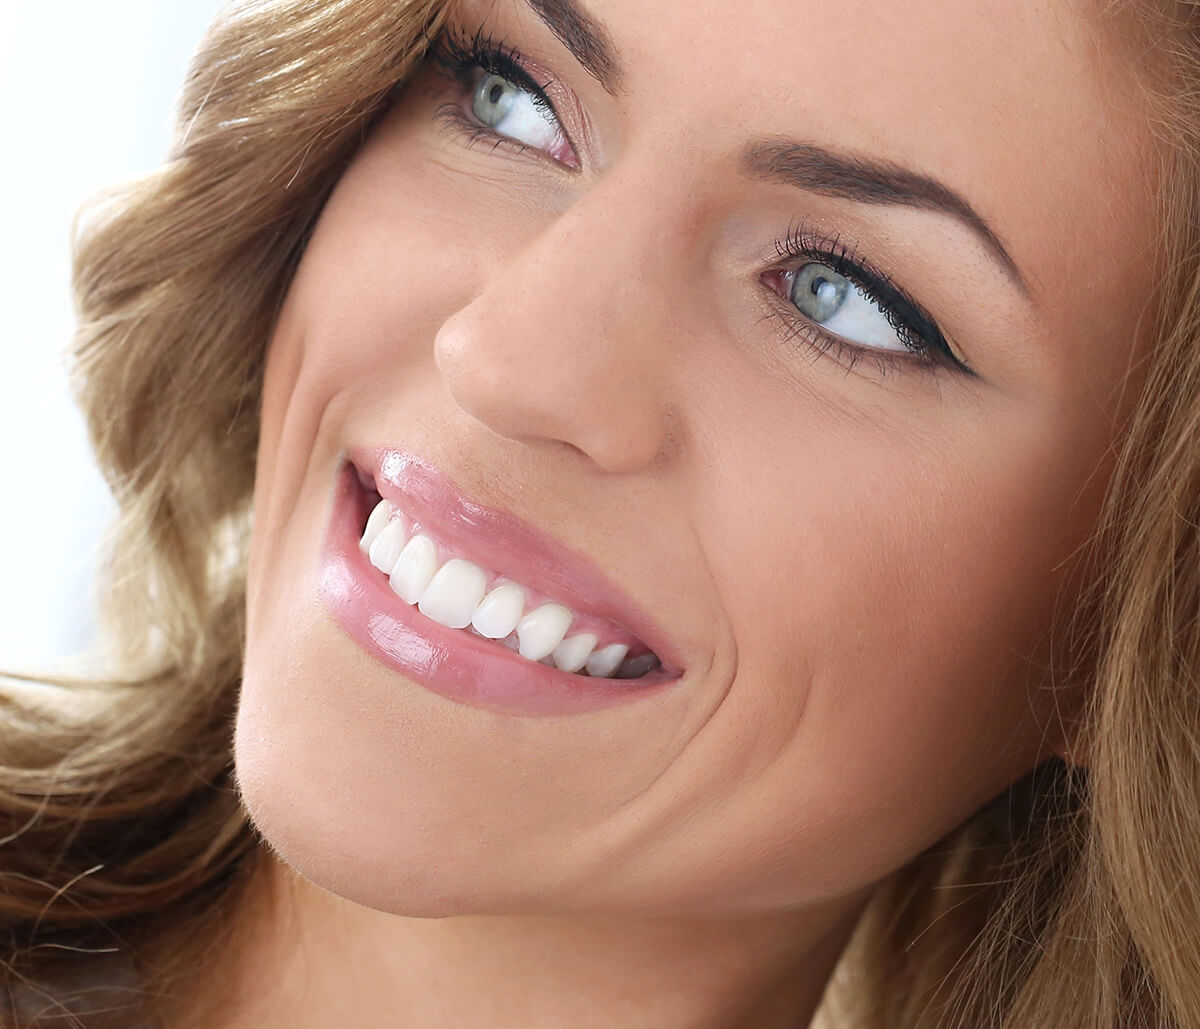 Routine Professional Teeth Cleanings Protect Your Oral Health in Phoenix, AZ Area